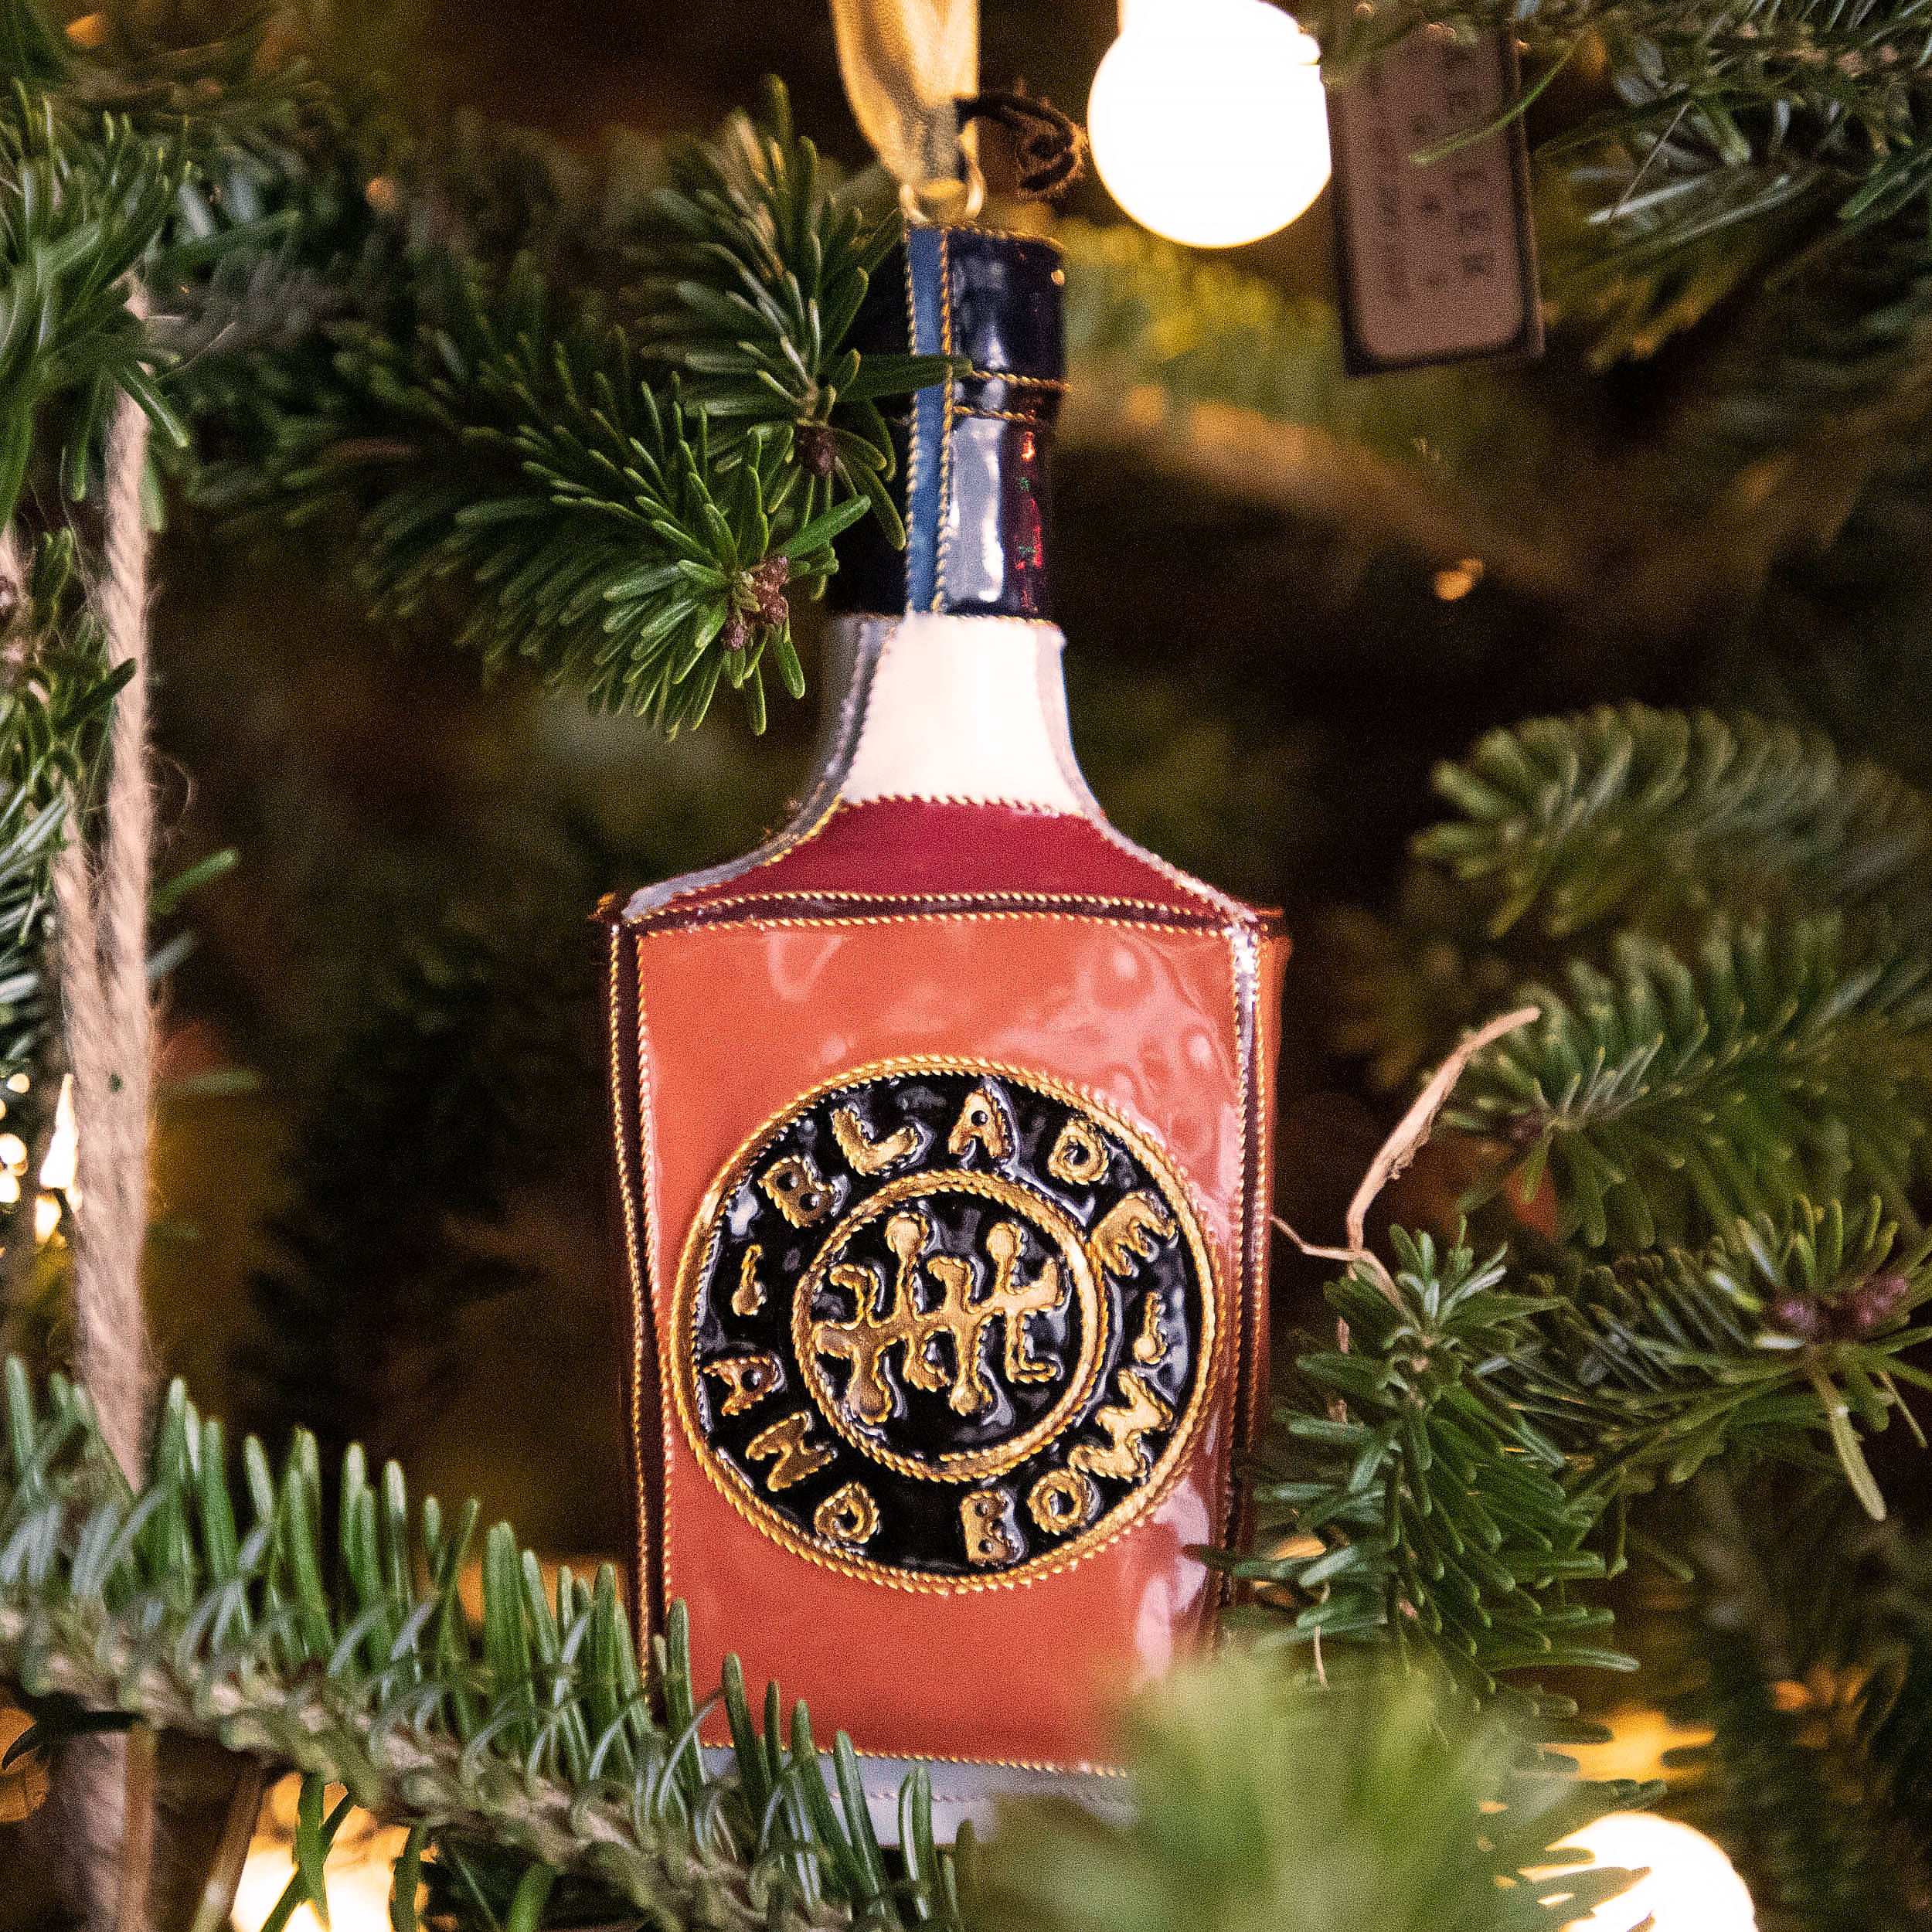 Blade and Bow Bottle Ornament